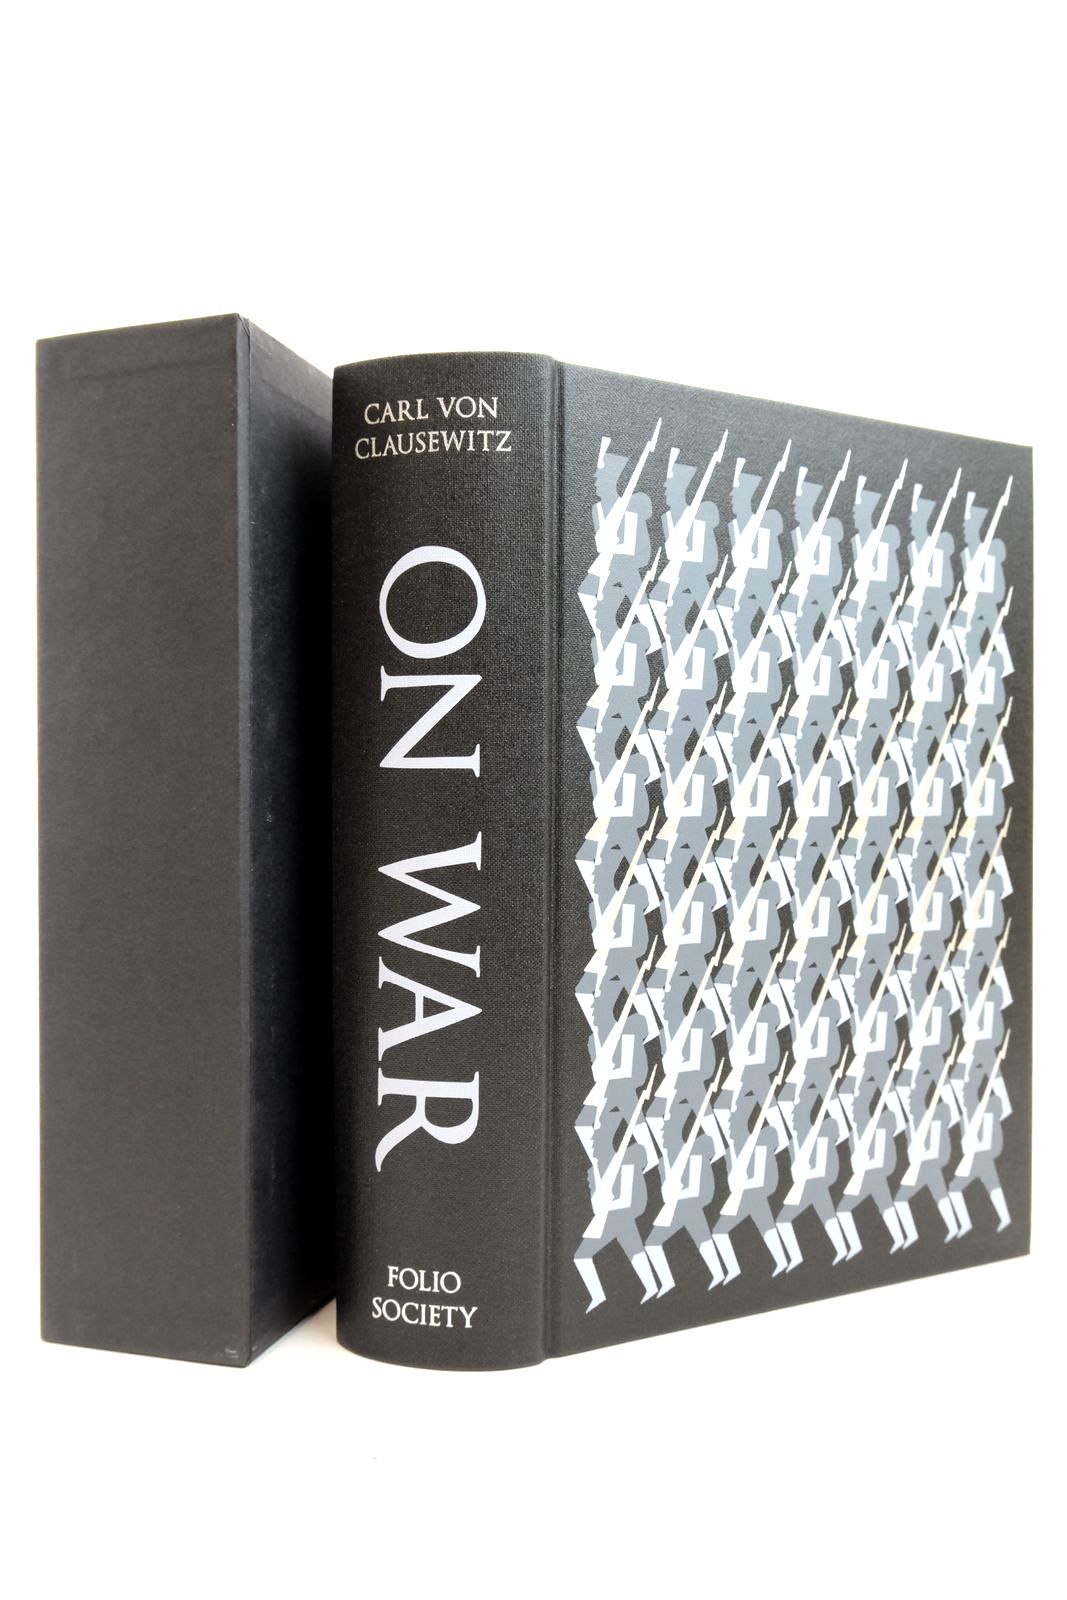 Photo of ON WAR written by Von Clausewitz, Carl illustrated by McLaren, Joe published by Folio Society (STOCK CODE: 2140939)  for sale by Stella & Rose's Books